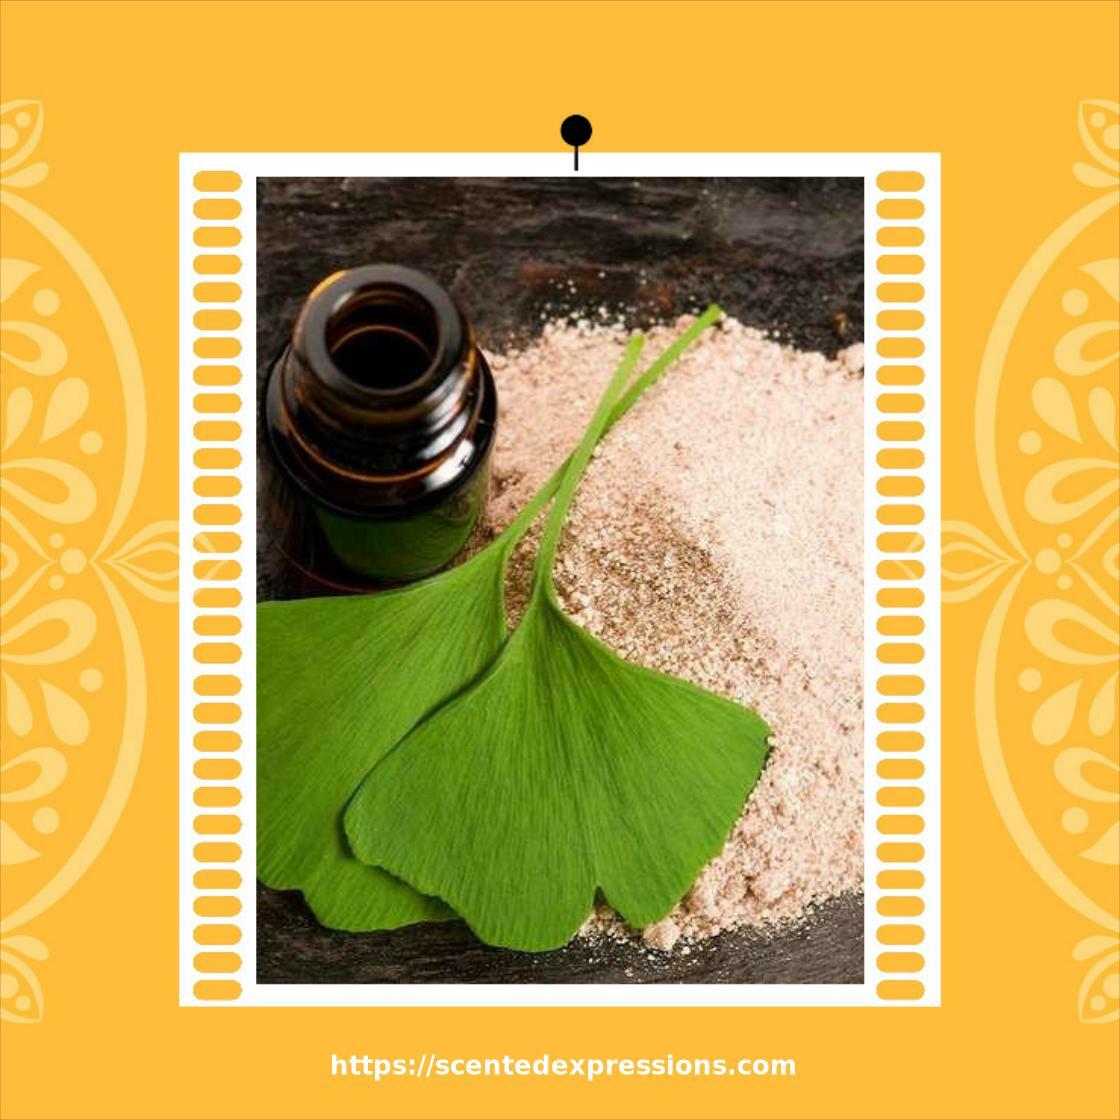 Ready for an epic shopping spree? Ginkgo Biloba Powder, at a mind-blowing price of $2.68 Don't wait!
scentedexpressions.com/ginkgo-biloba-…
#SOAPMAKINGSUPPLIES #CARRIEROIL